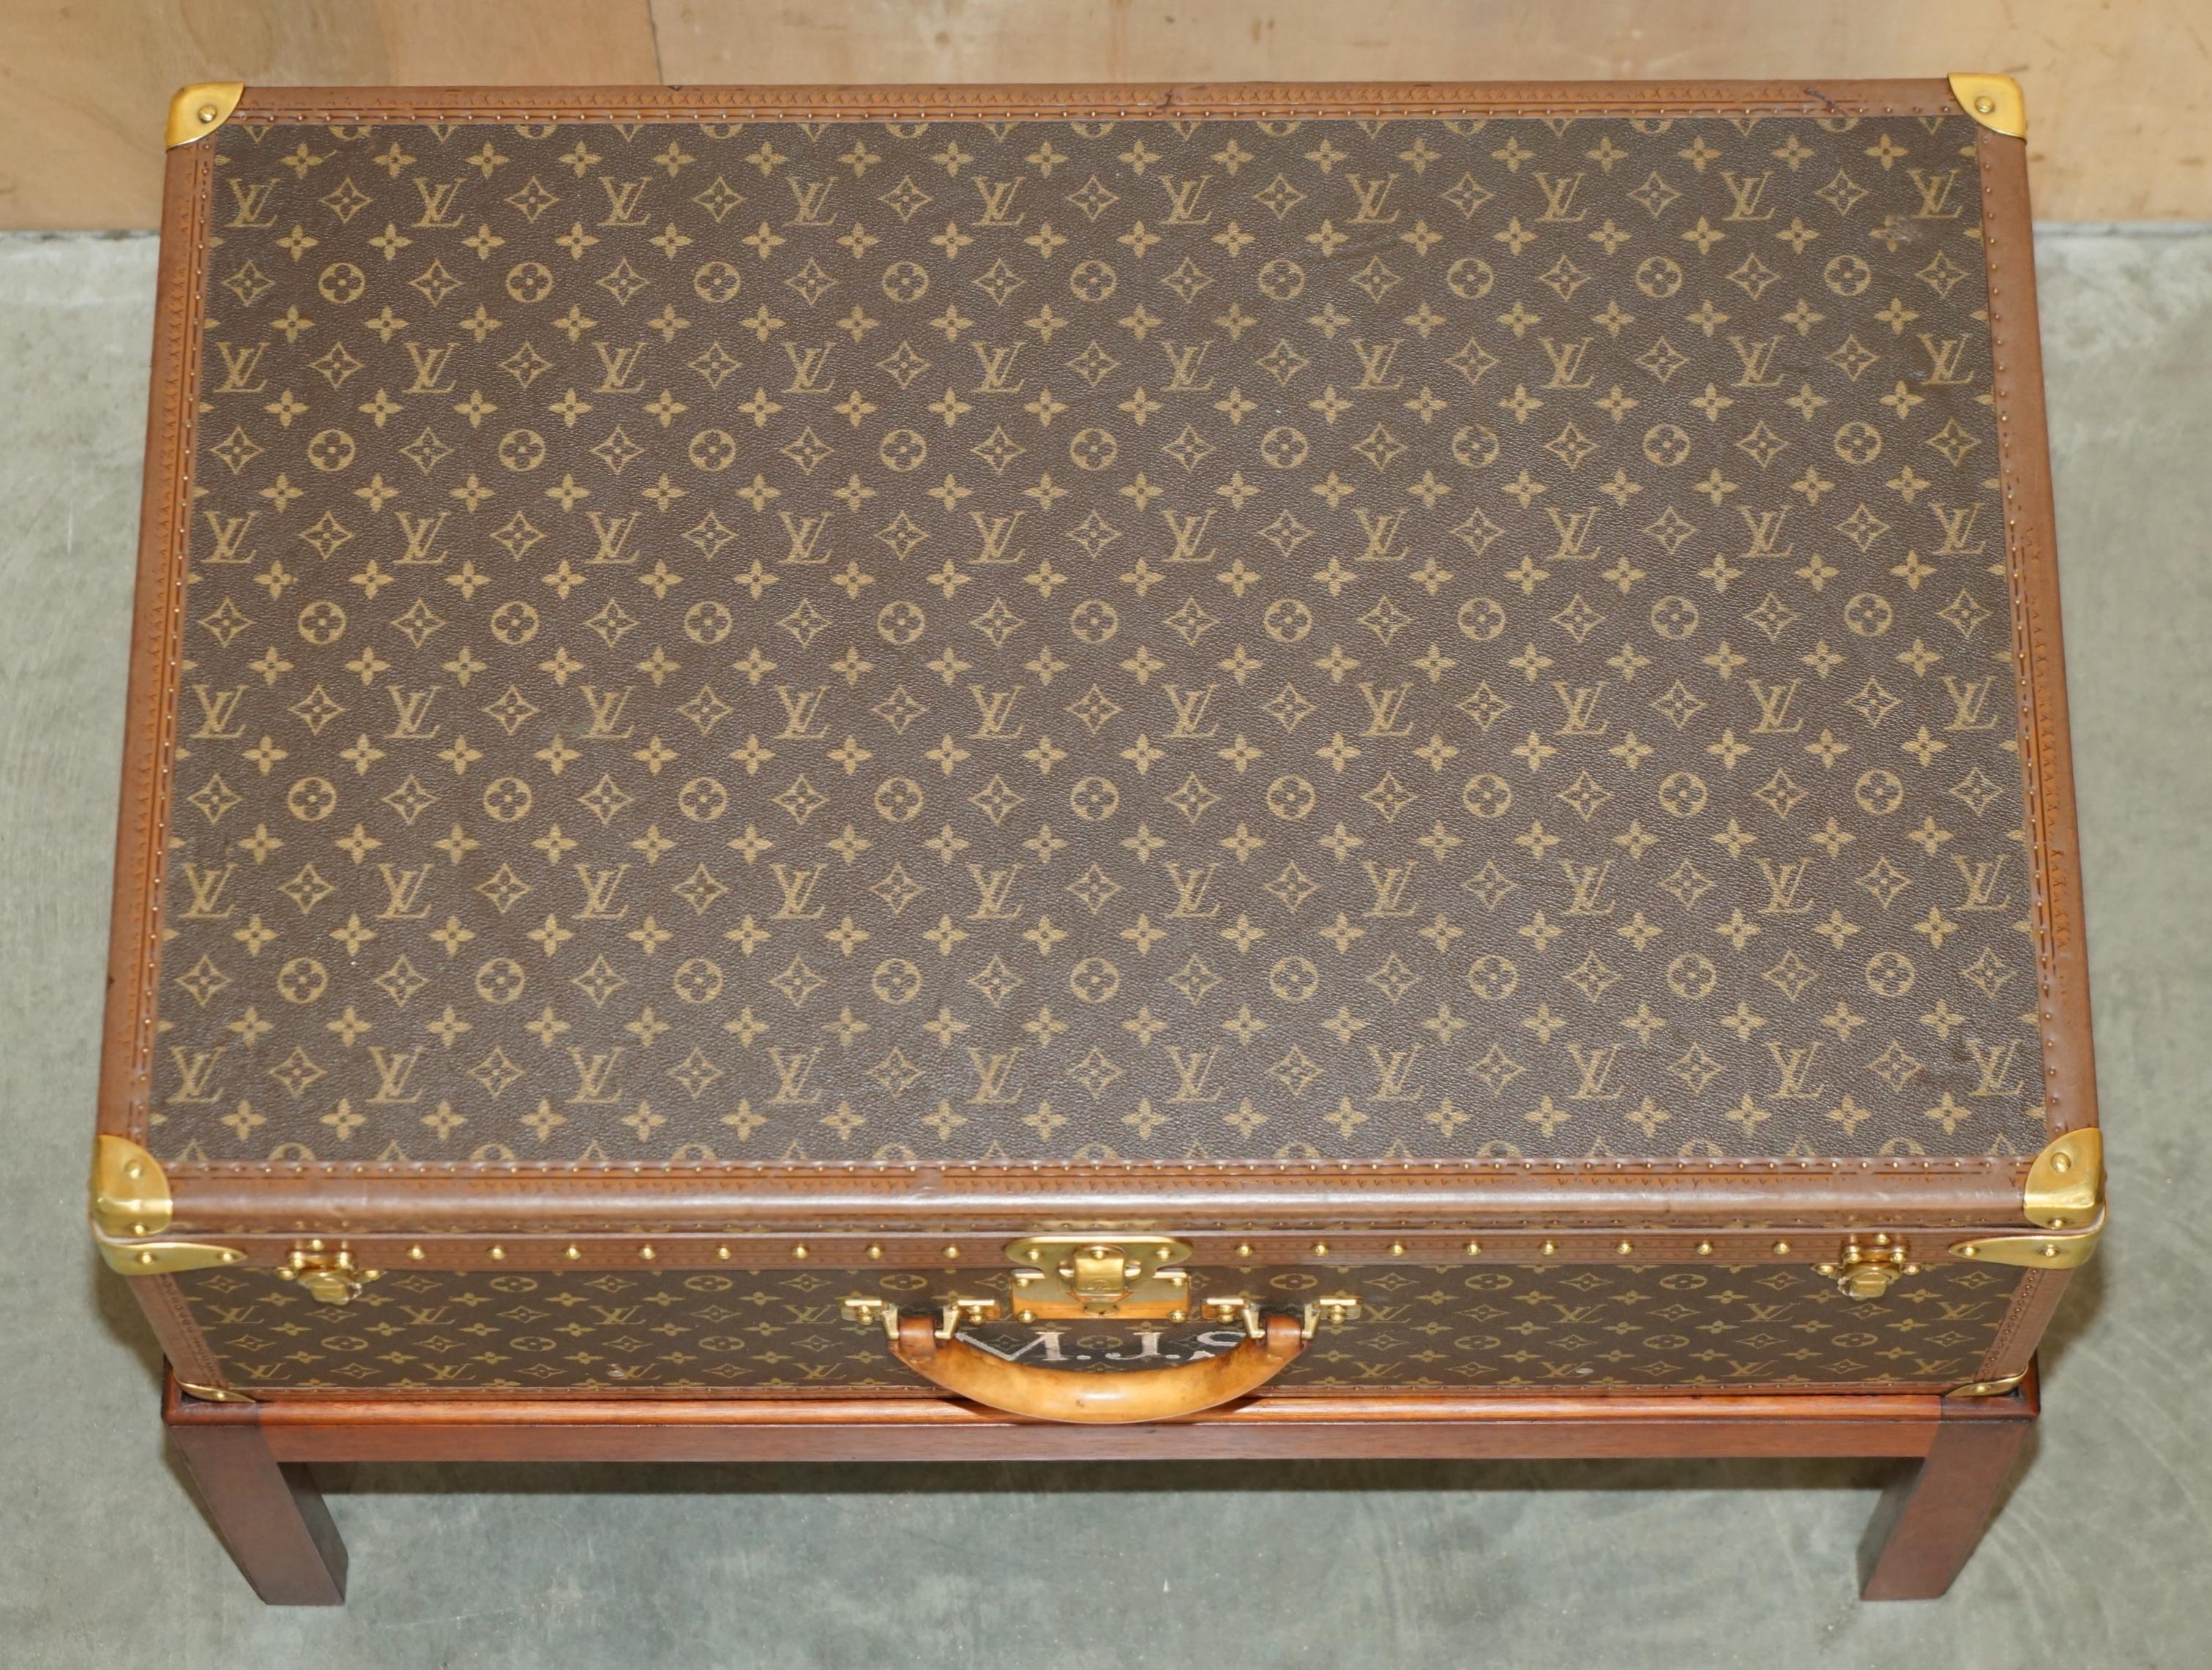 FULLY RESTORED ViNTAGE BROWN LEATHER LOUIS VUITTON SUITCASE TRUNK COFFEE TABLE 3